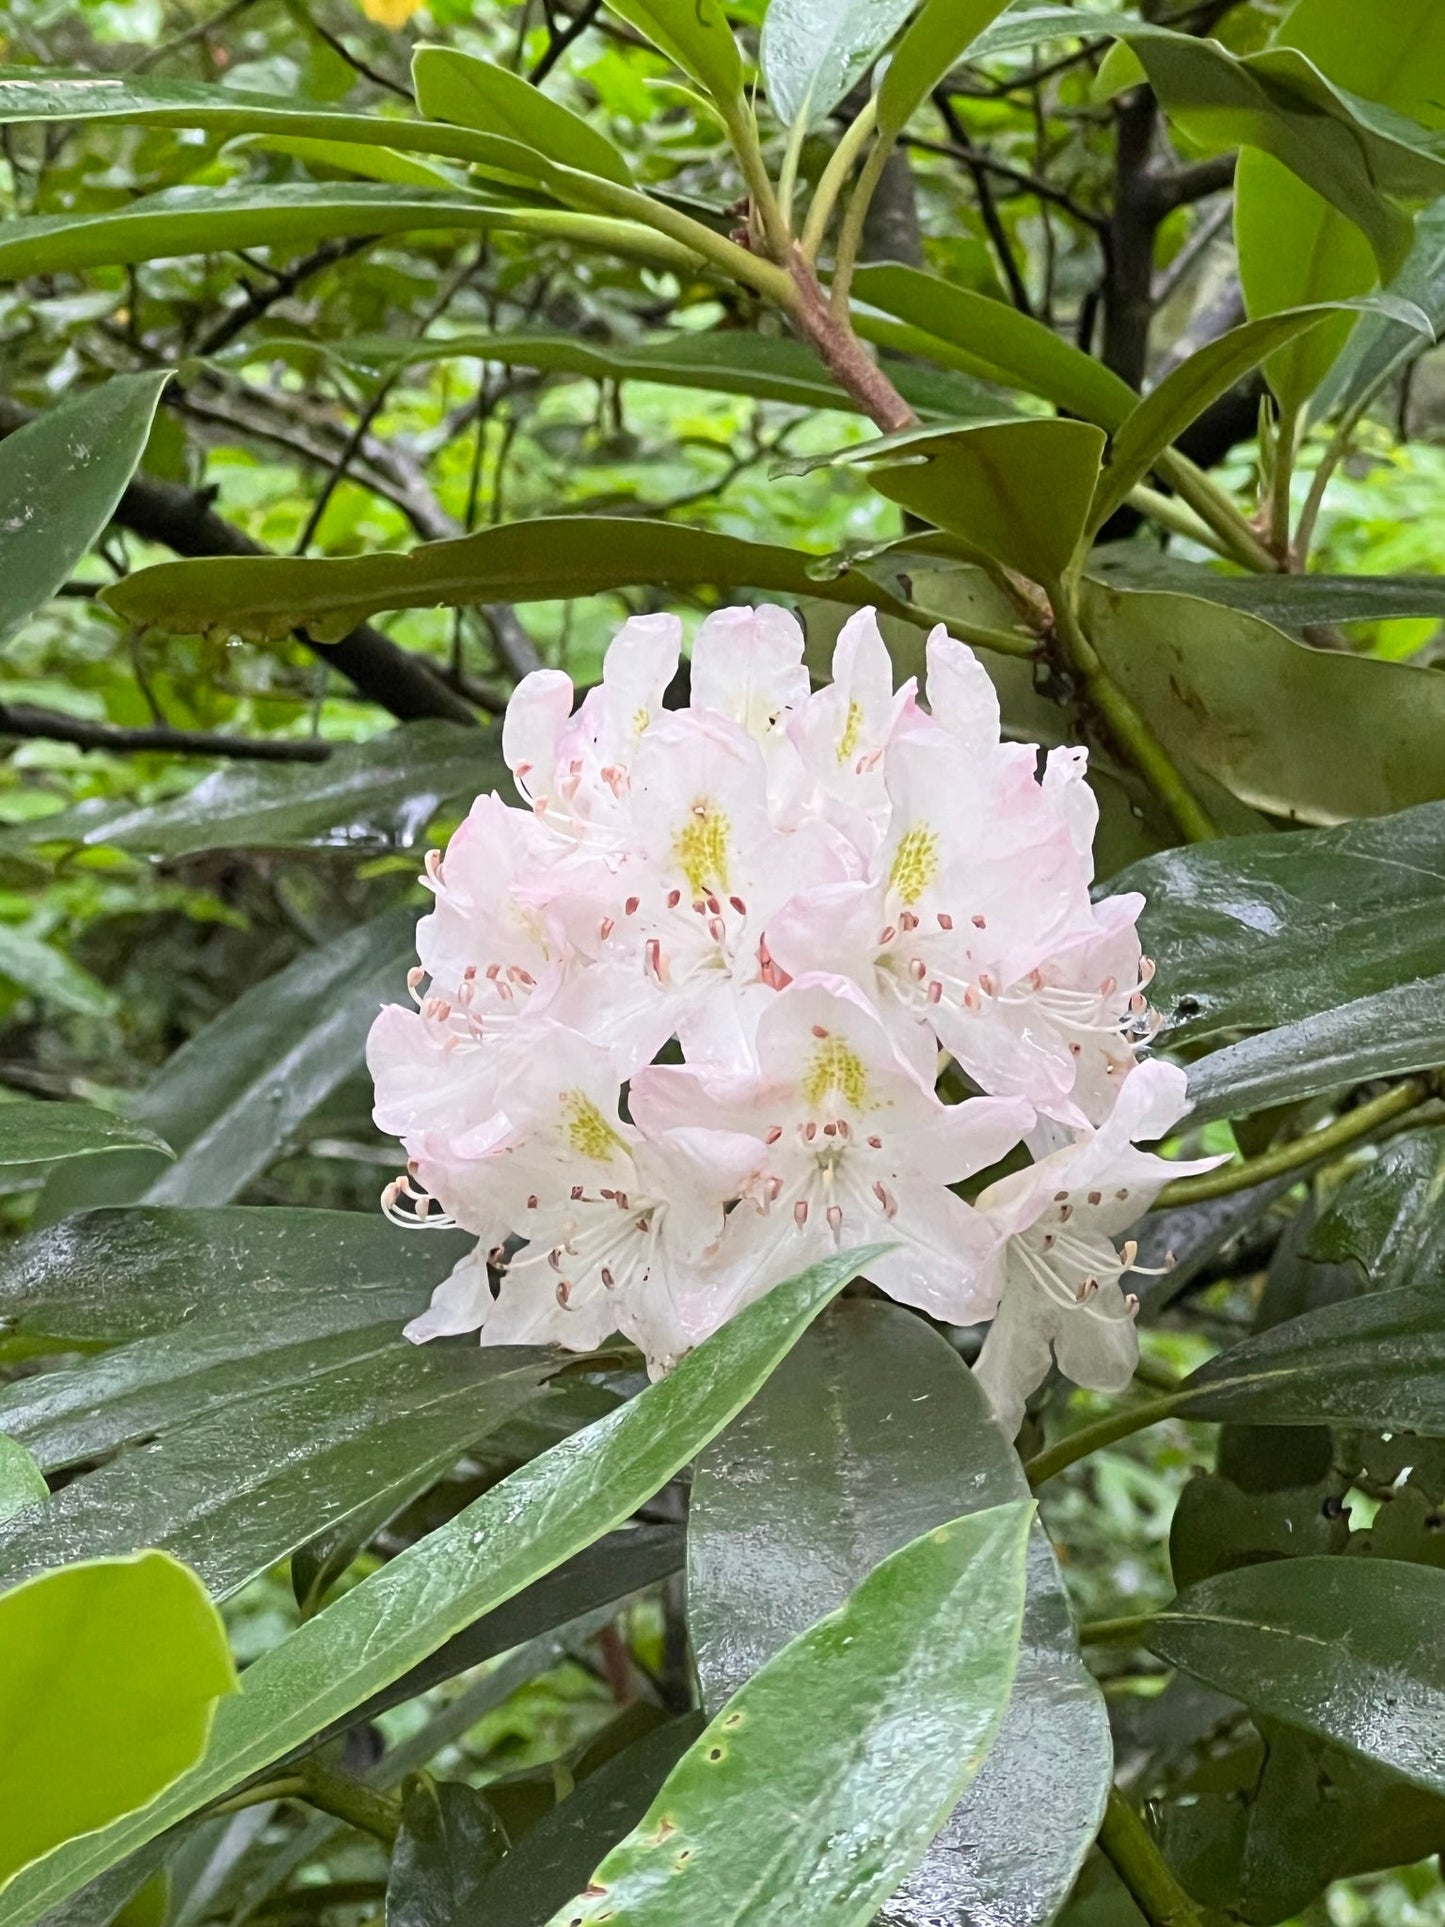 Rosebay Rhododendron   Rhododendron maximum  500 Seeds  USA Company